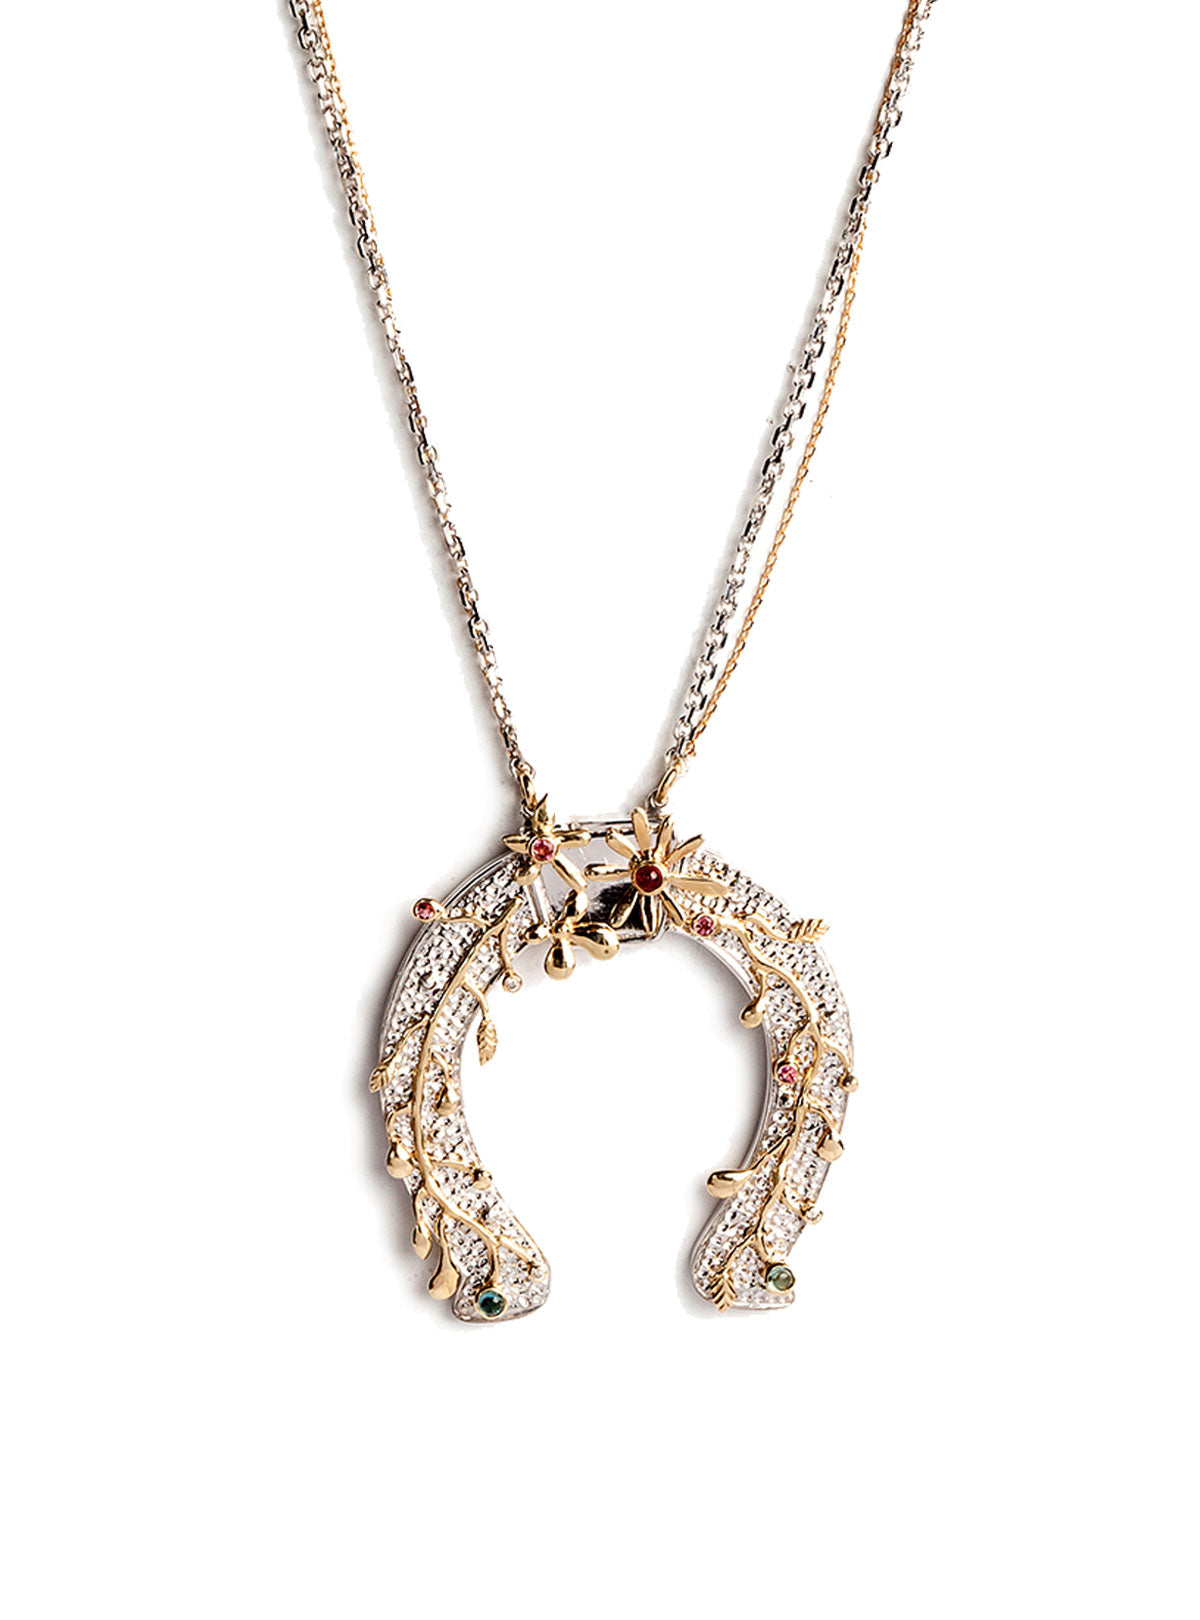 Horseshoe Spiralling Branches Necklace